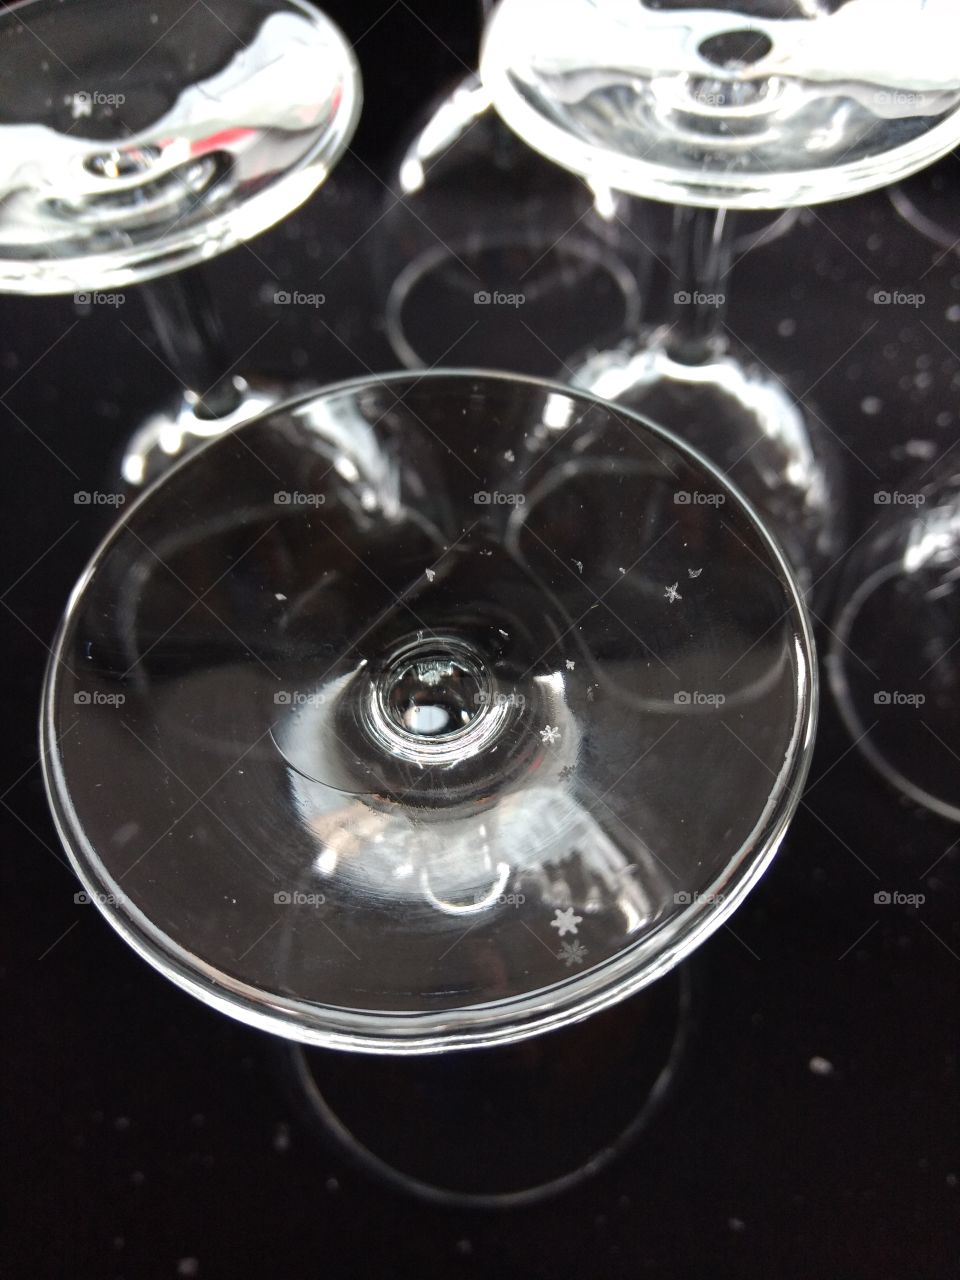 snowflakes on a wineglass